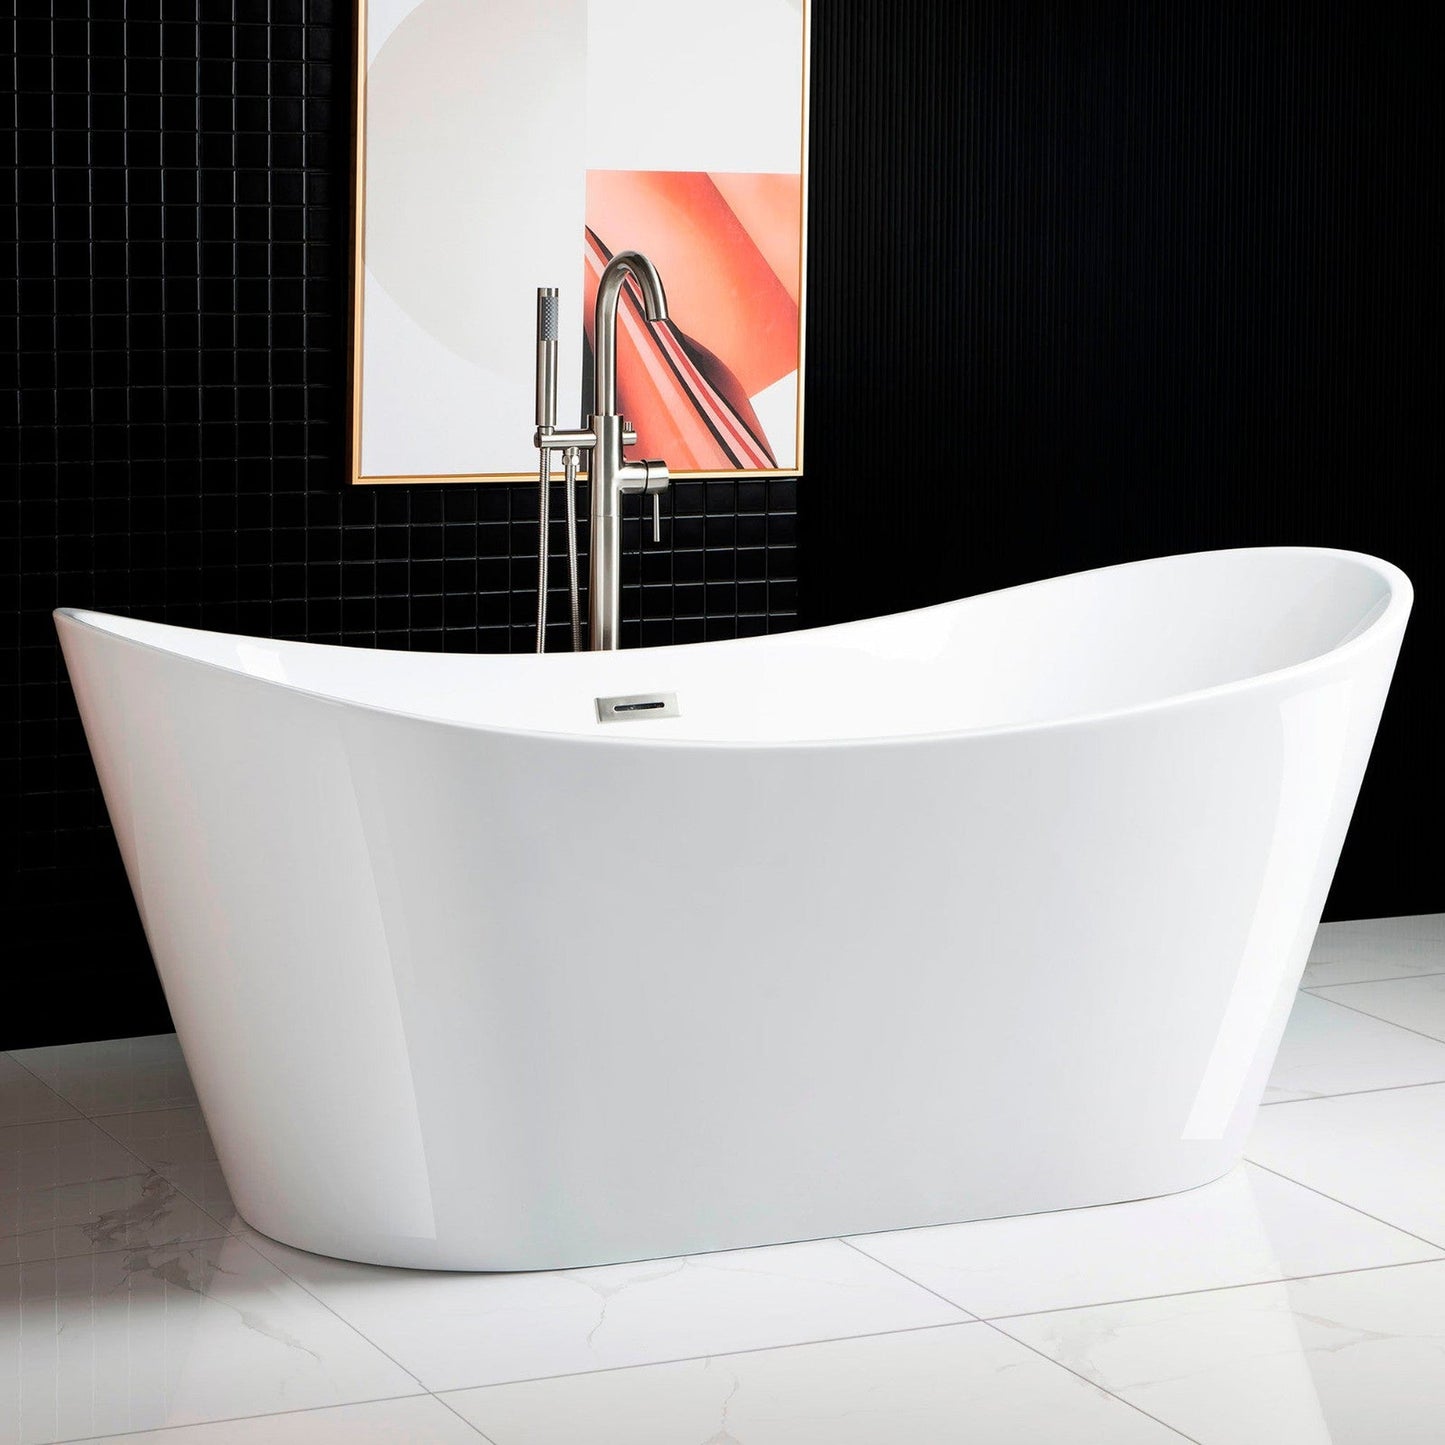 WoodBridge B0017 71" White Acrylic Freestanding Soaking Bathtub With Brushed Nickel Drain, Overflow, F0070BNVT Tub Filler and Caddy Tray